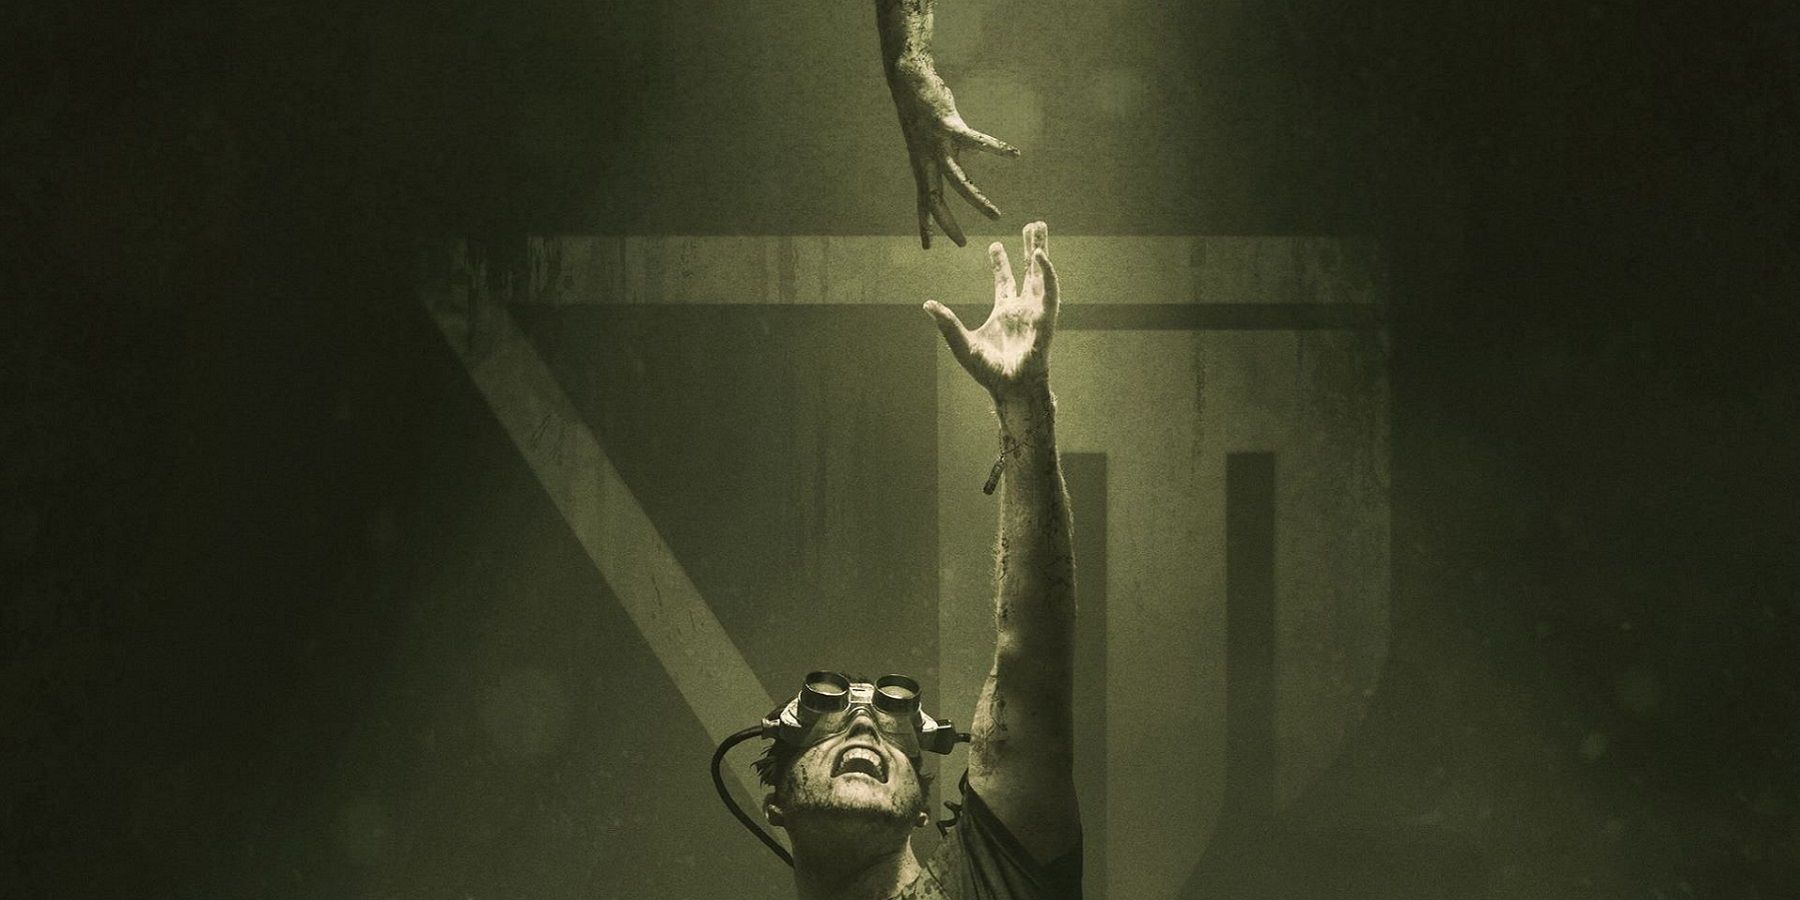 Image from Outlast Trials showing someone wearing night vision goggles reaching up to a hand.